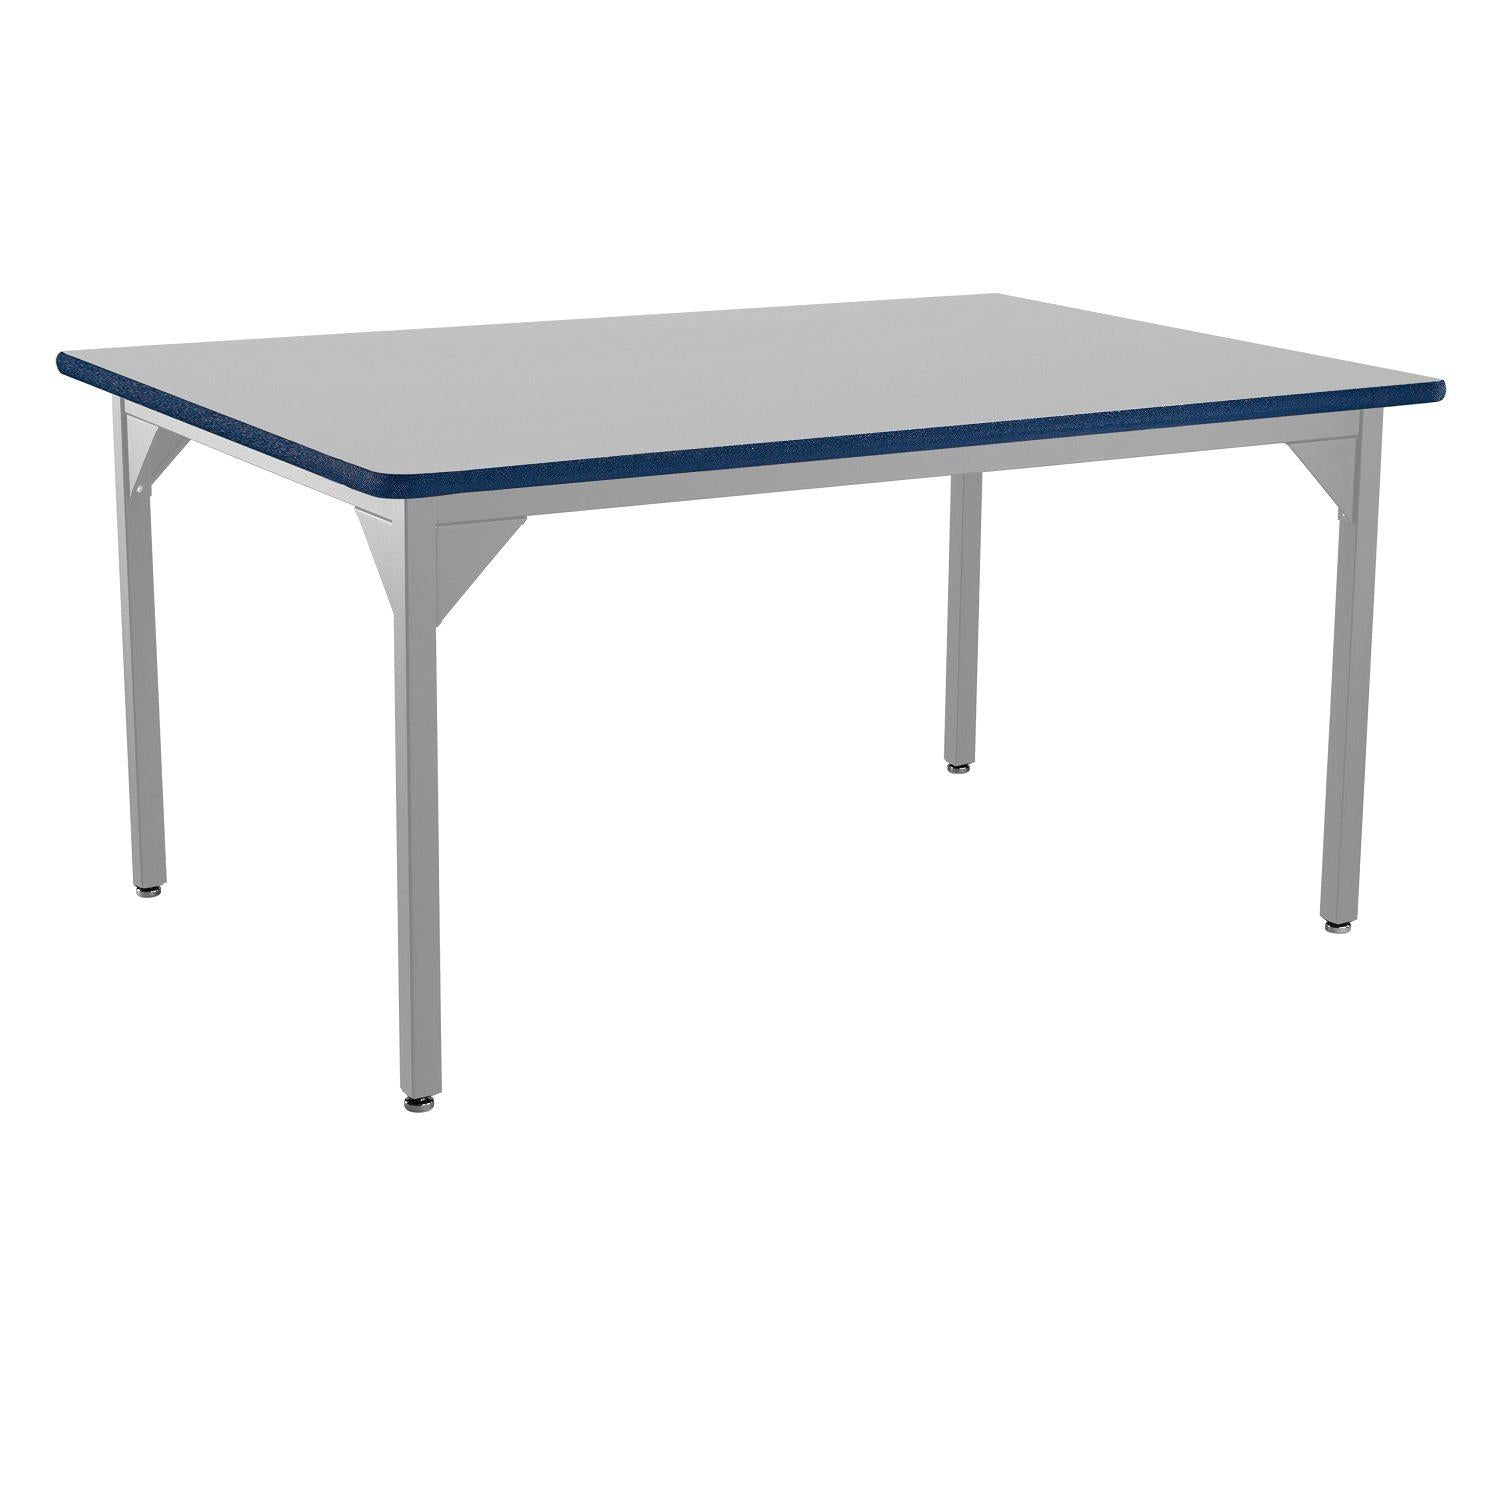 Heavy-Duty Fixed Height Utility Table, Soft Grey Frame, 48" x 60", Supreme High-Pressure Laminate Top with Black ProtectEdge